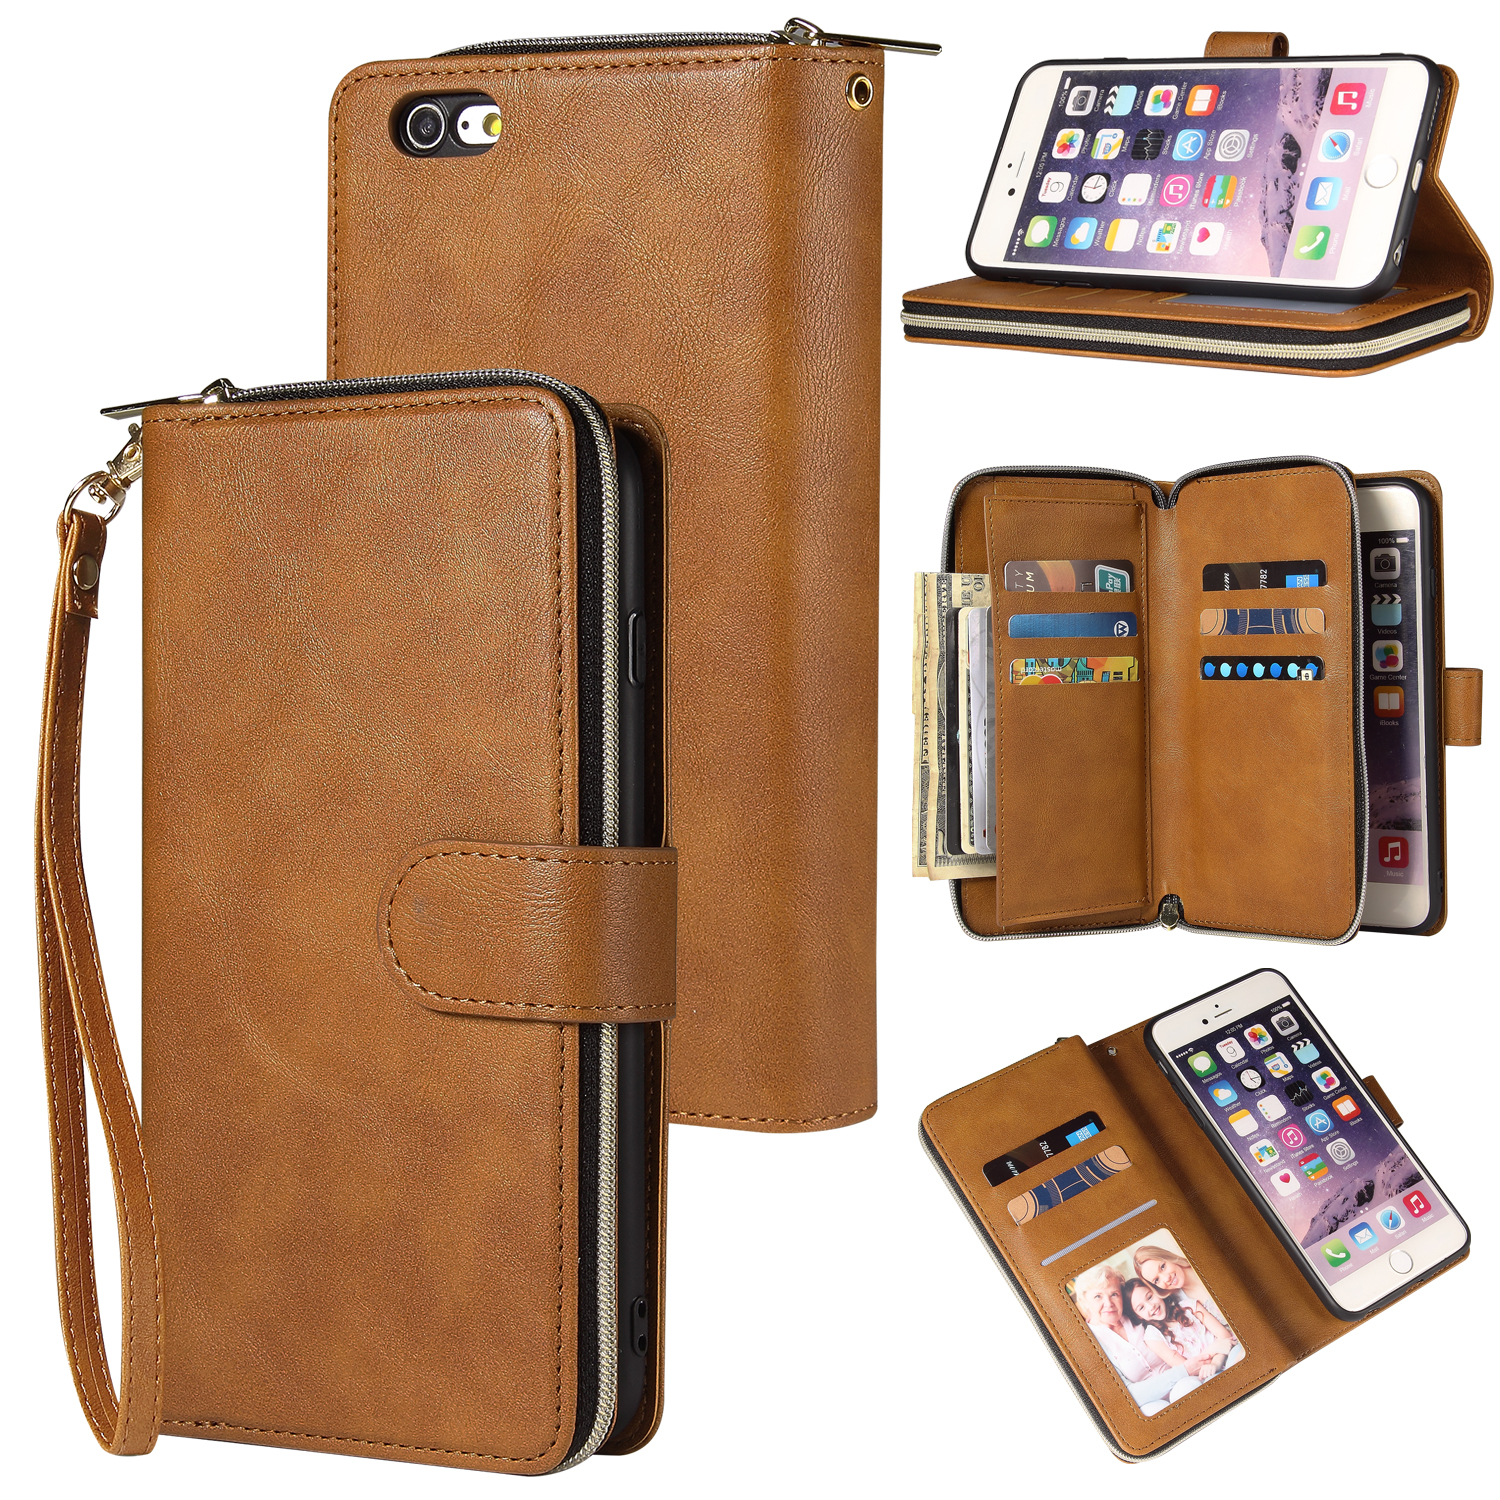 For Iphone 6/6s/6 Plus/6s Plus/7 Plus/8 Plus Pu Leather  Mobile Phone Cover Zipper Card Bag + Wrist Strap brown